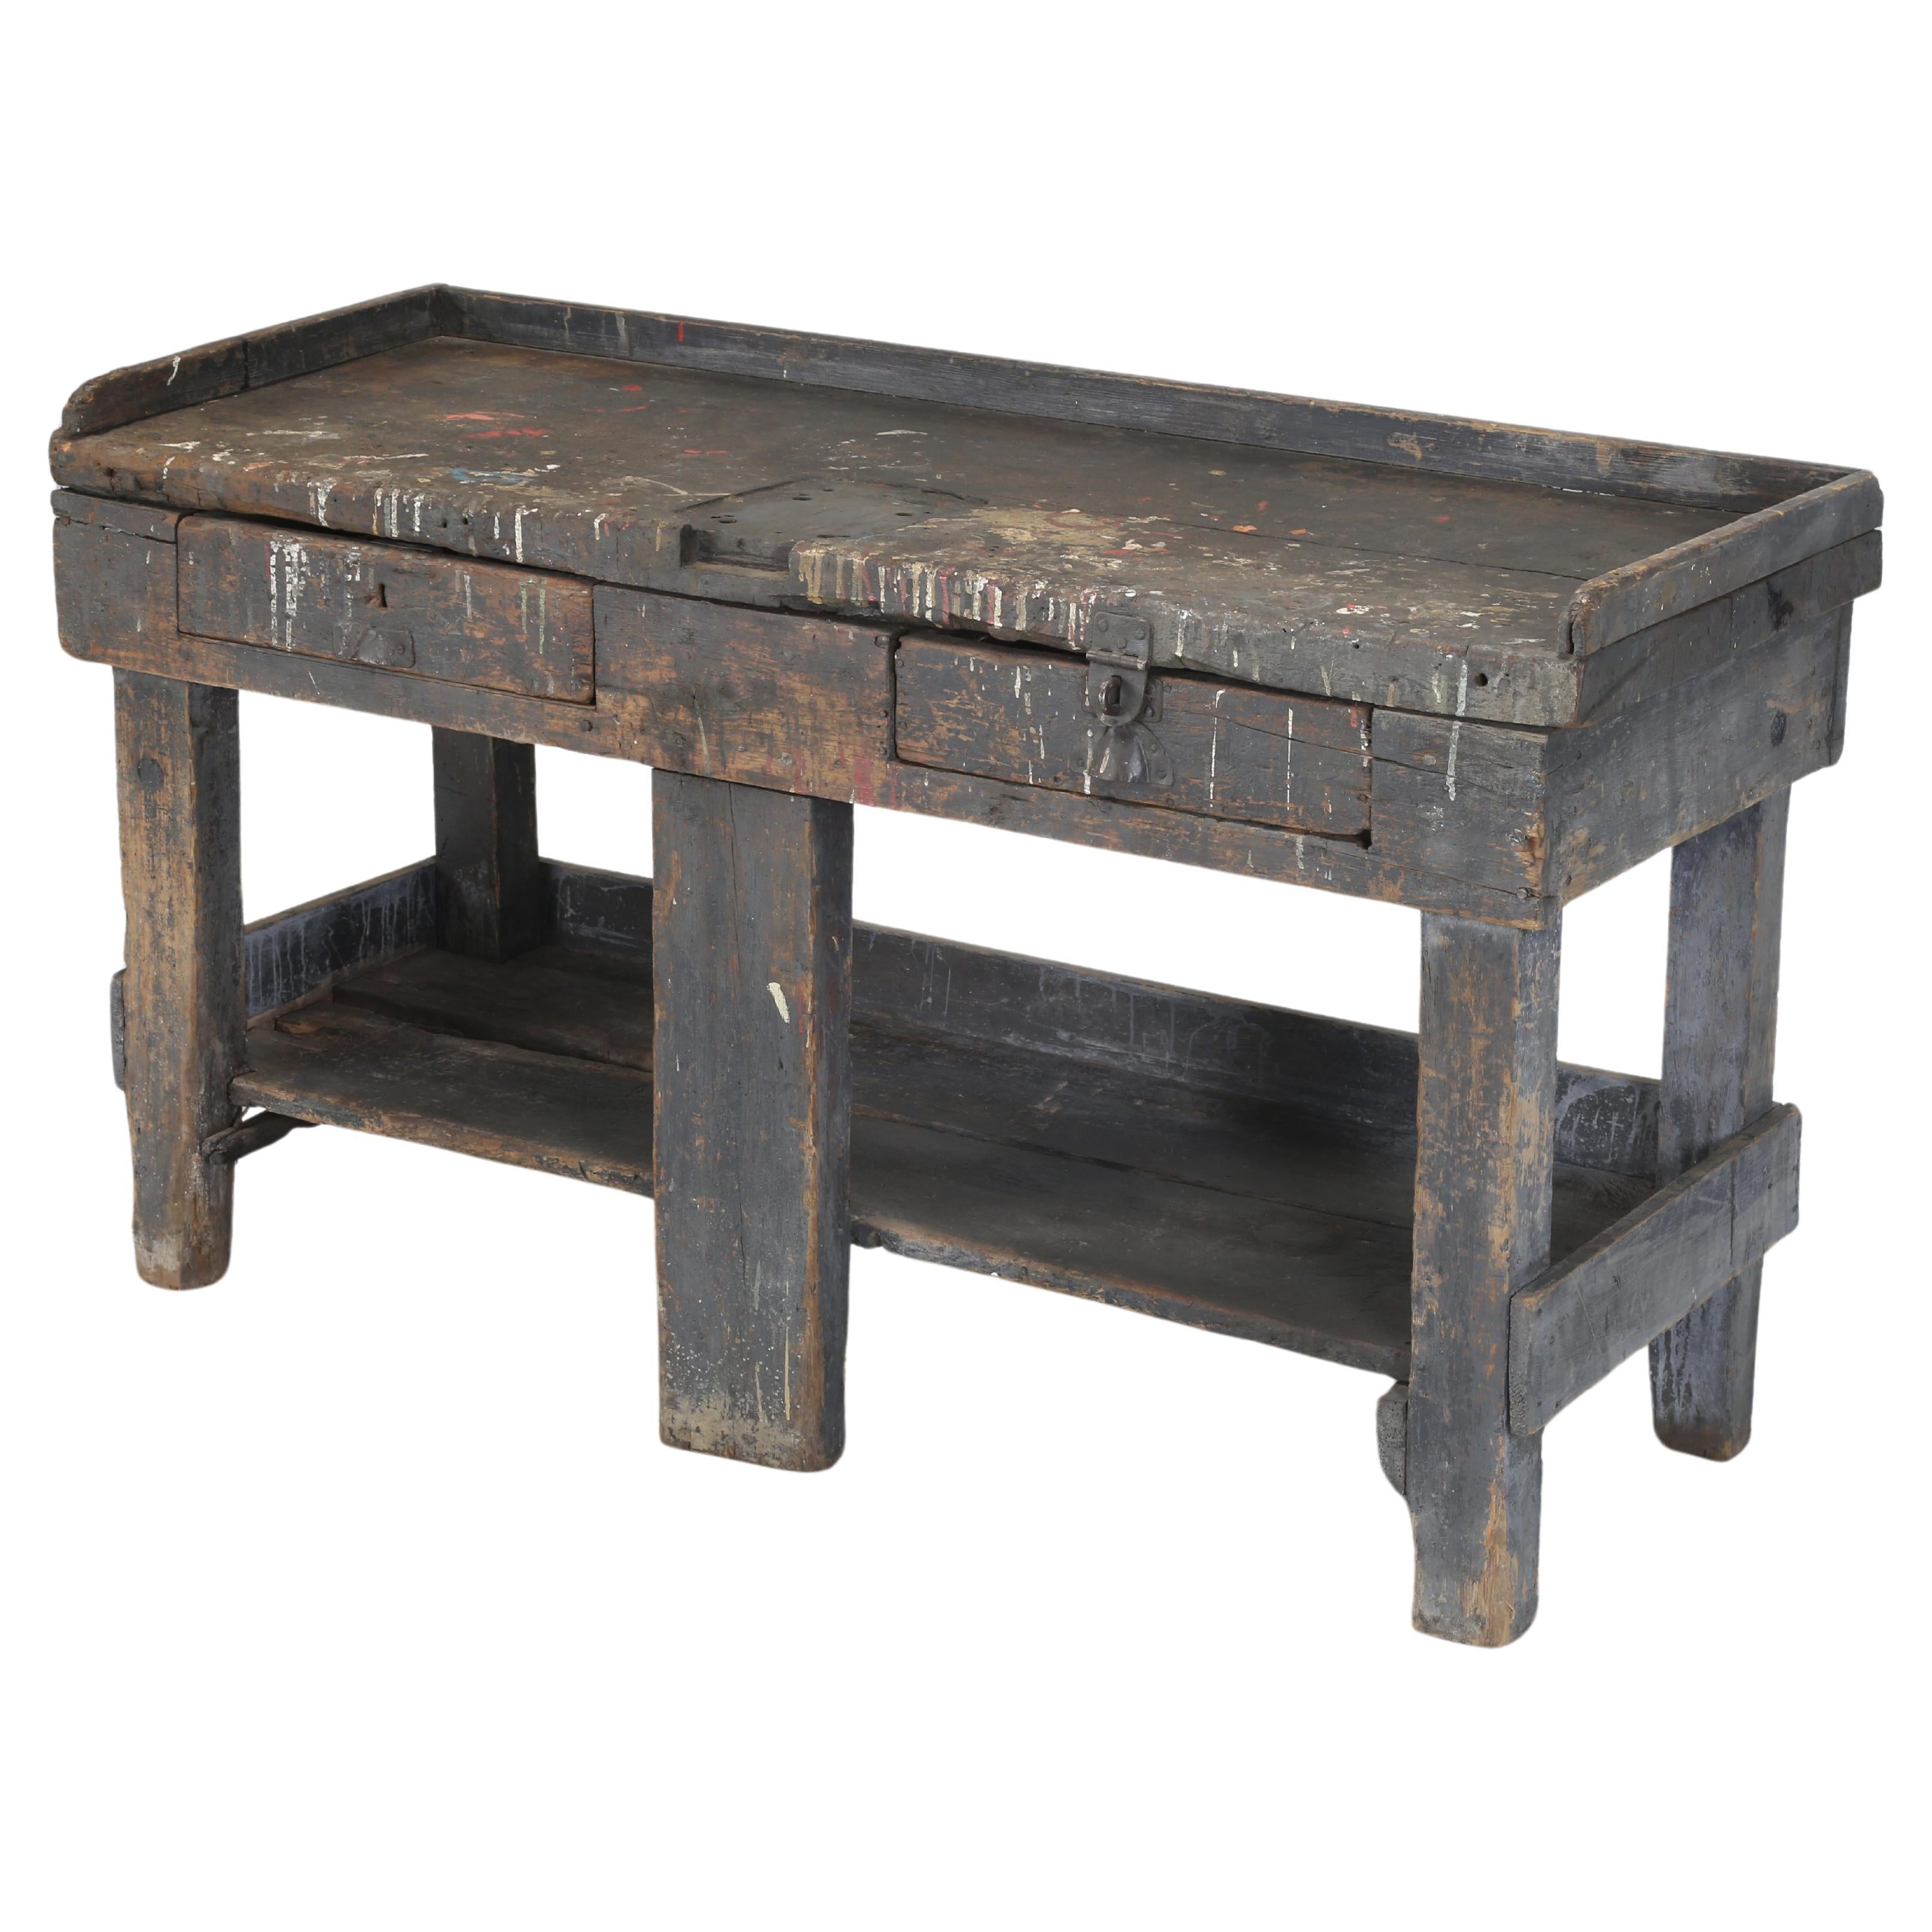 Antique Country Swedish Work Bench in Old Paint and Structurally Sound c1800's For Sale